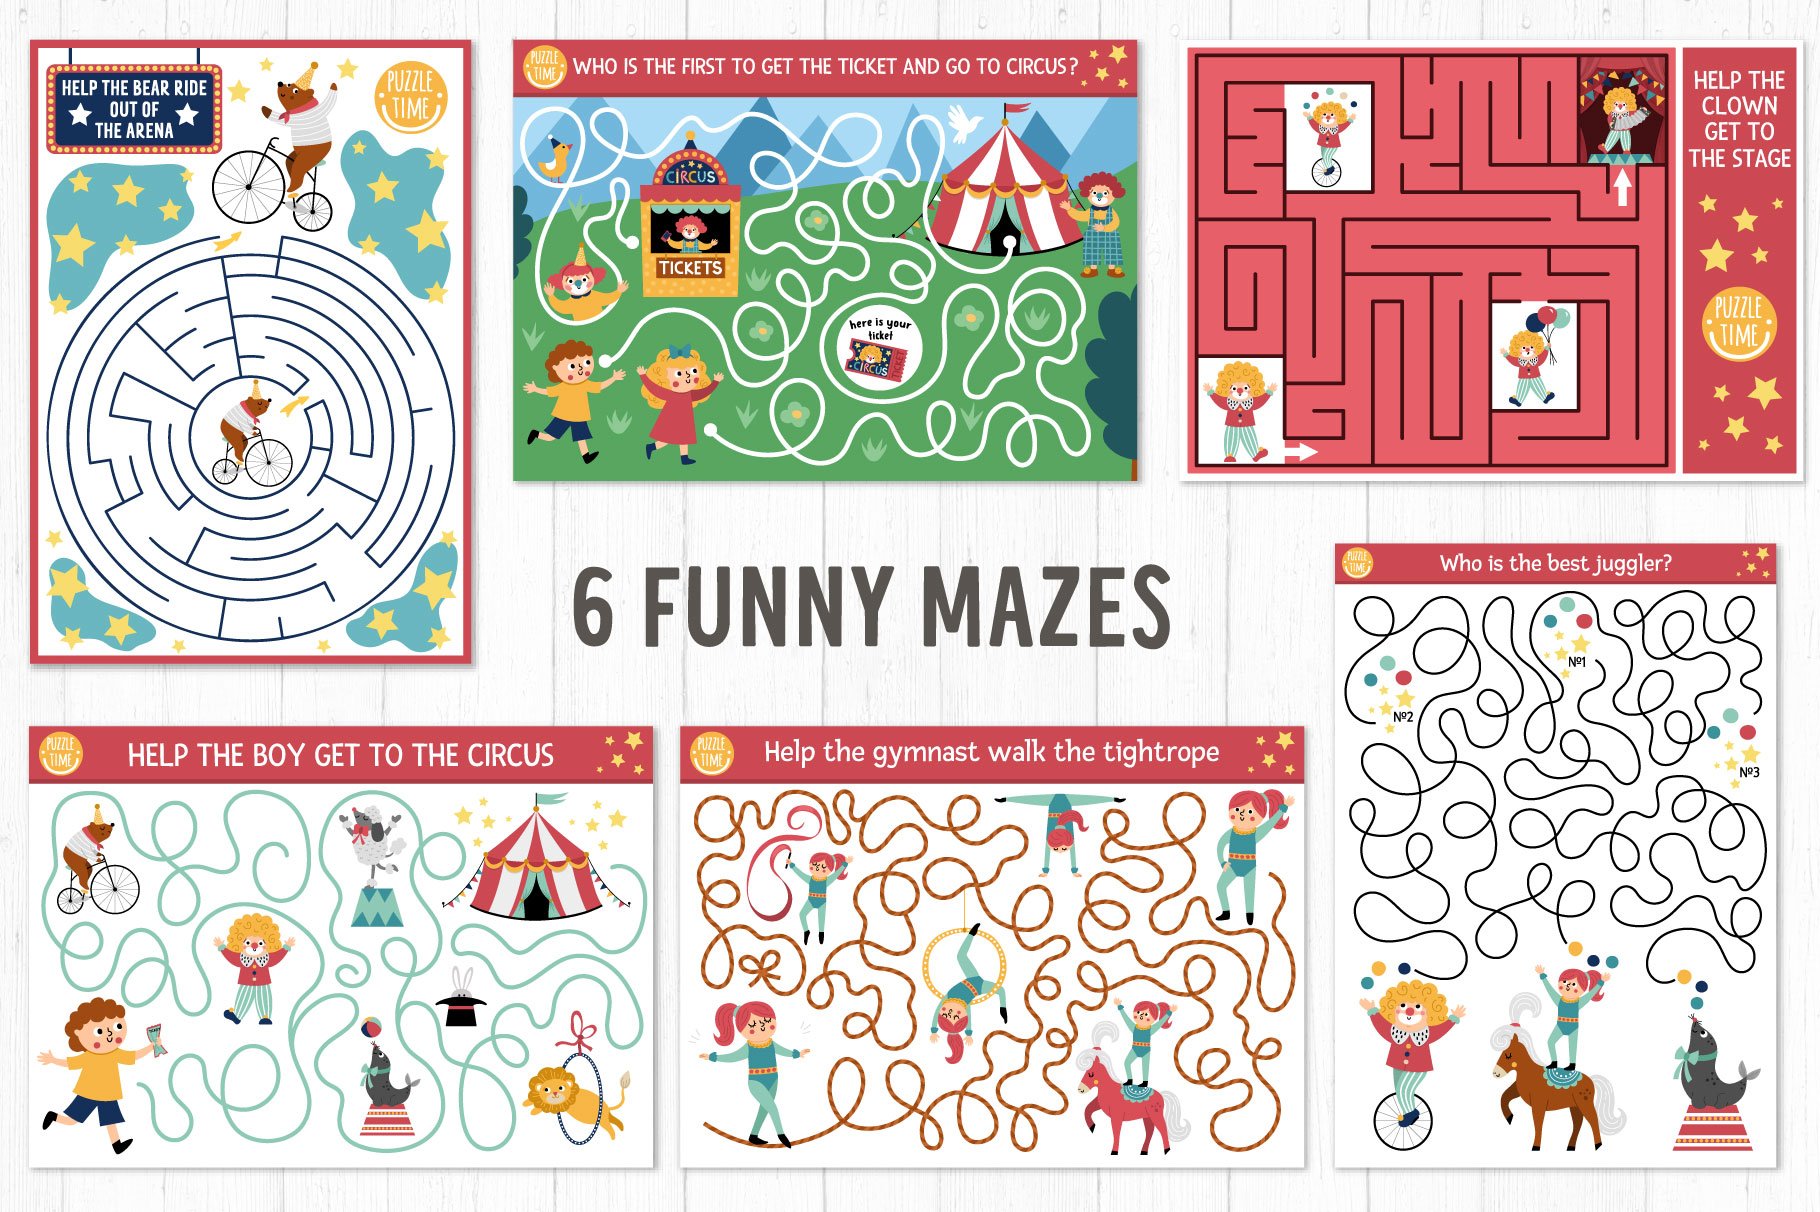 Circus games and activities for kids - funny mazes preview.